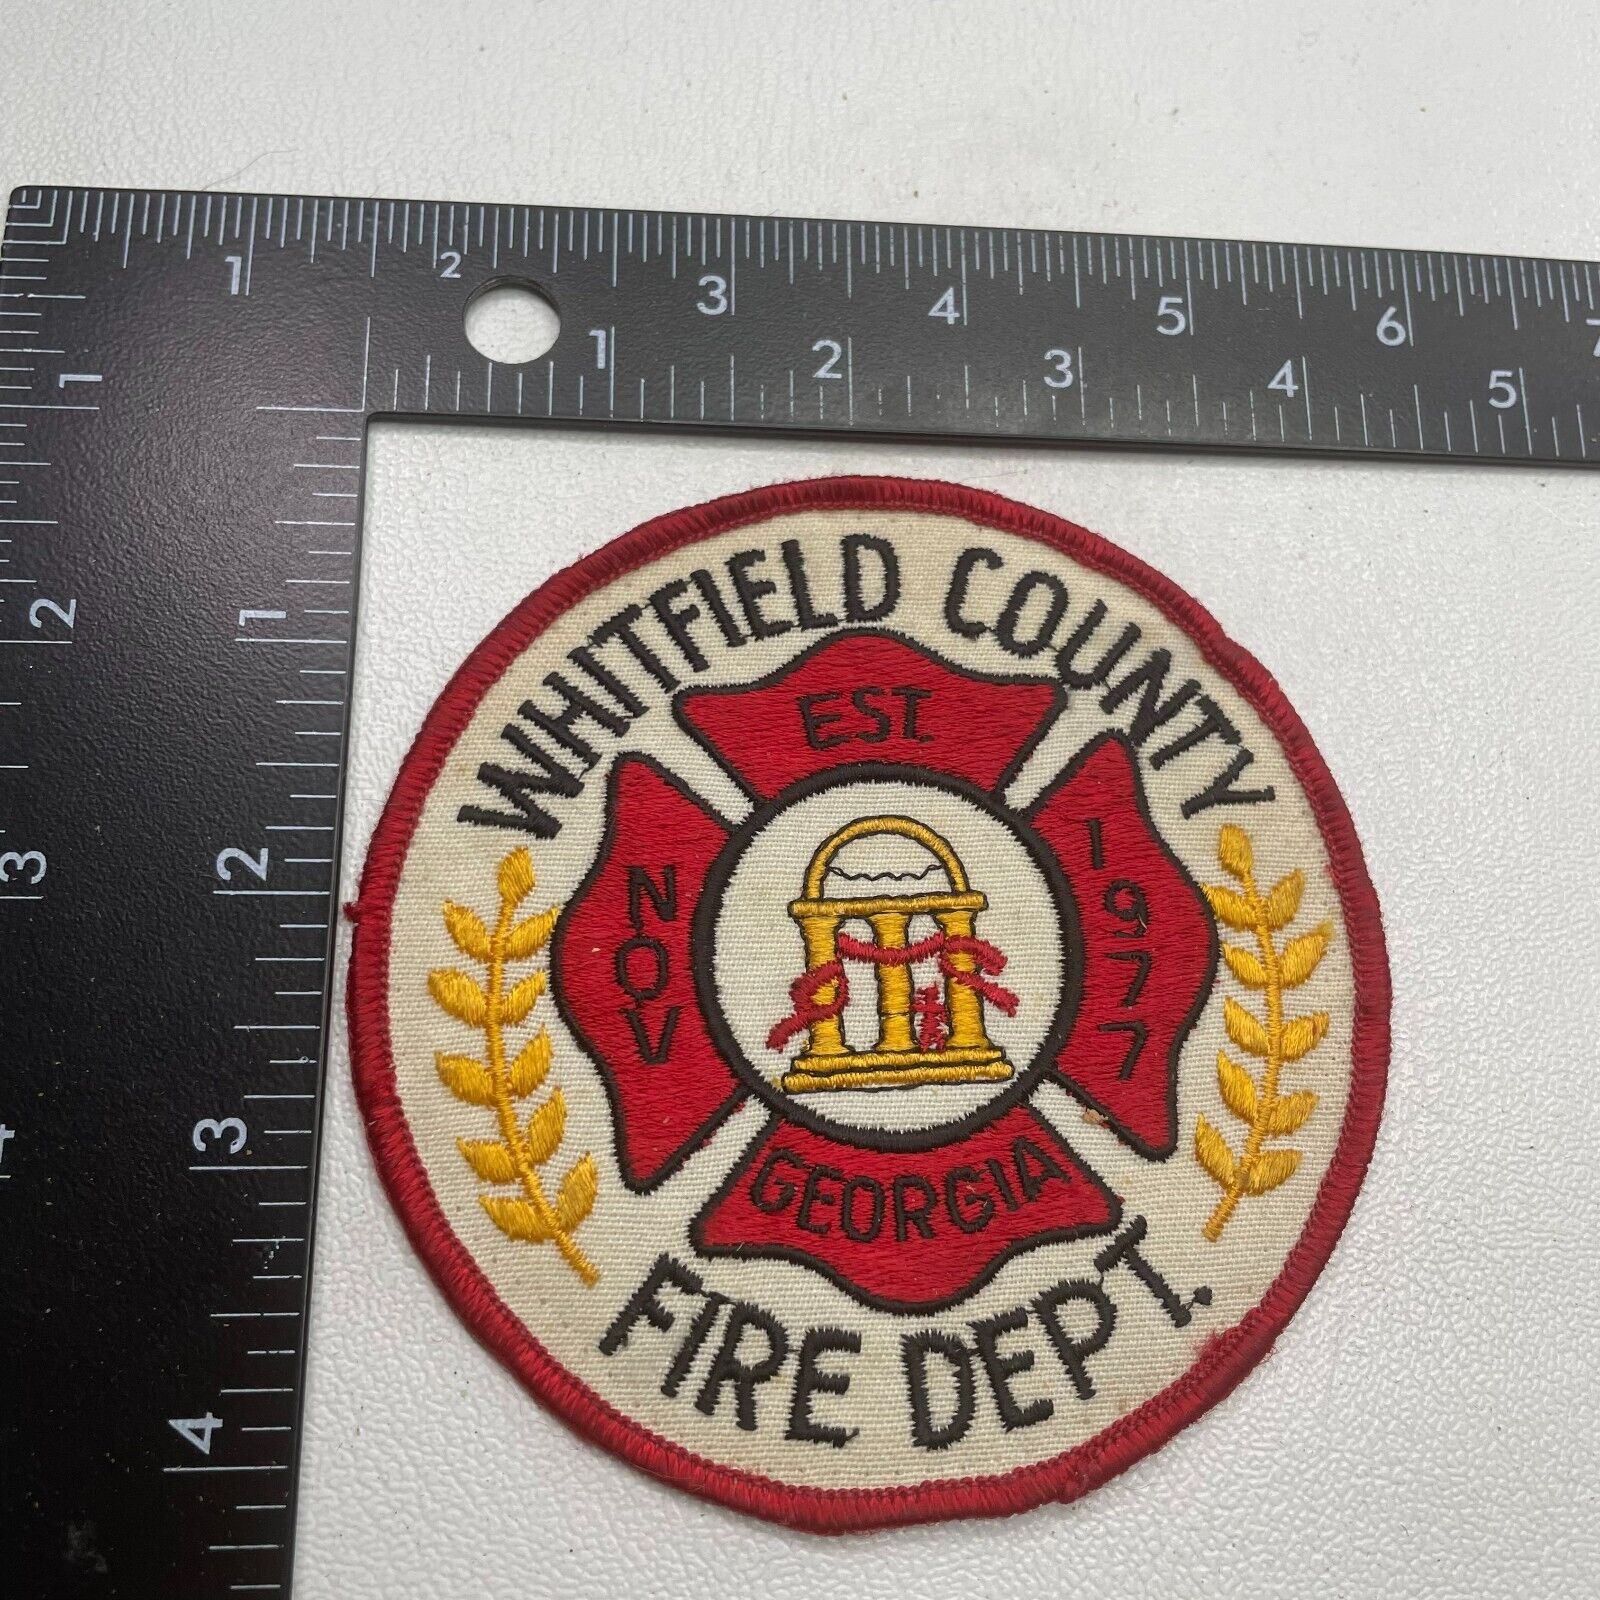 Vintage WHITFIELD COUNTRY FIRE DEPARTMENT Patch 28TU